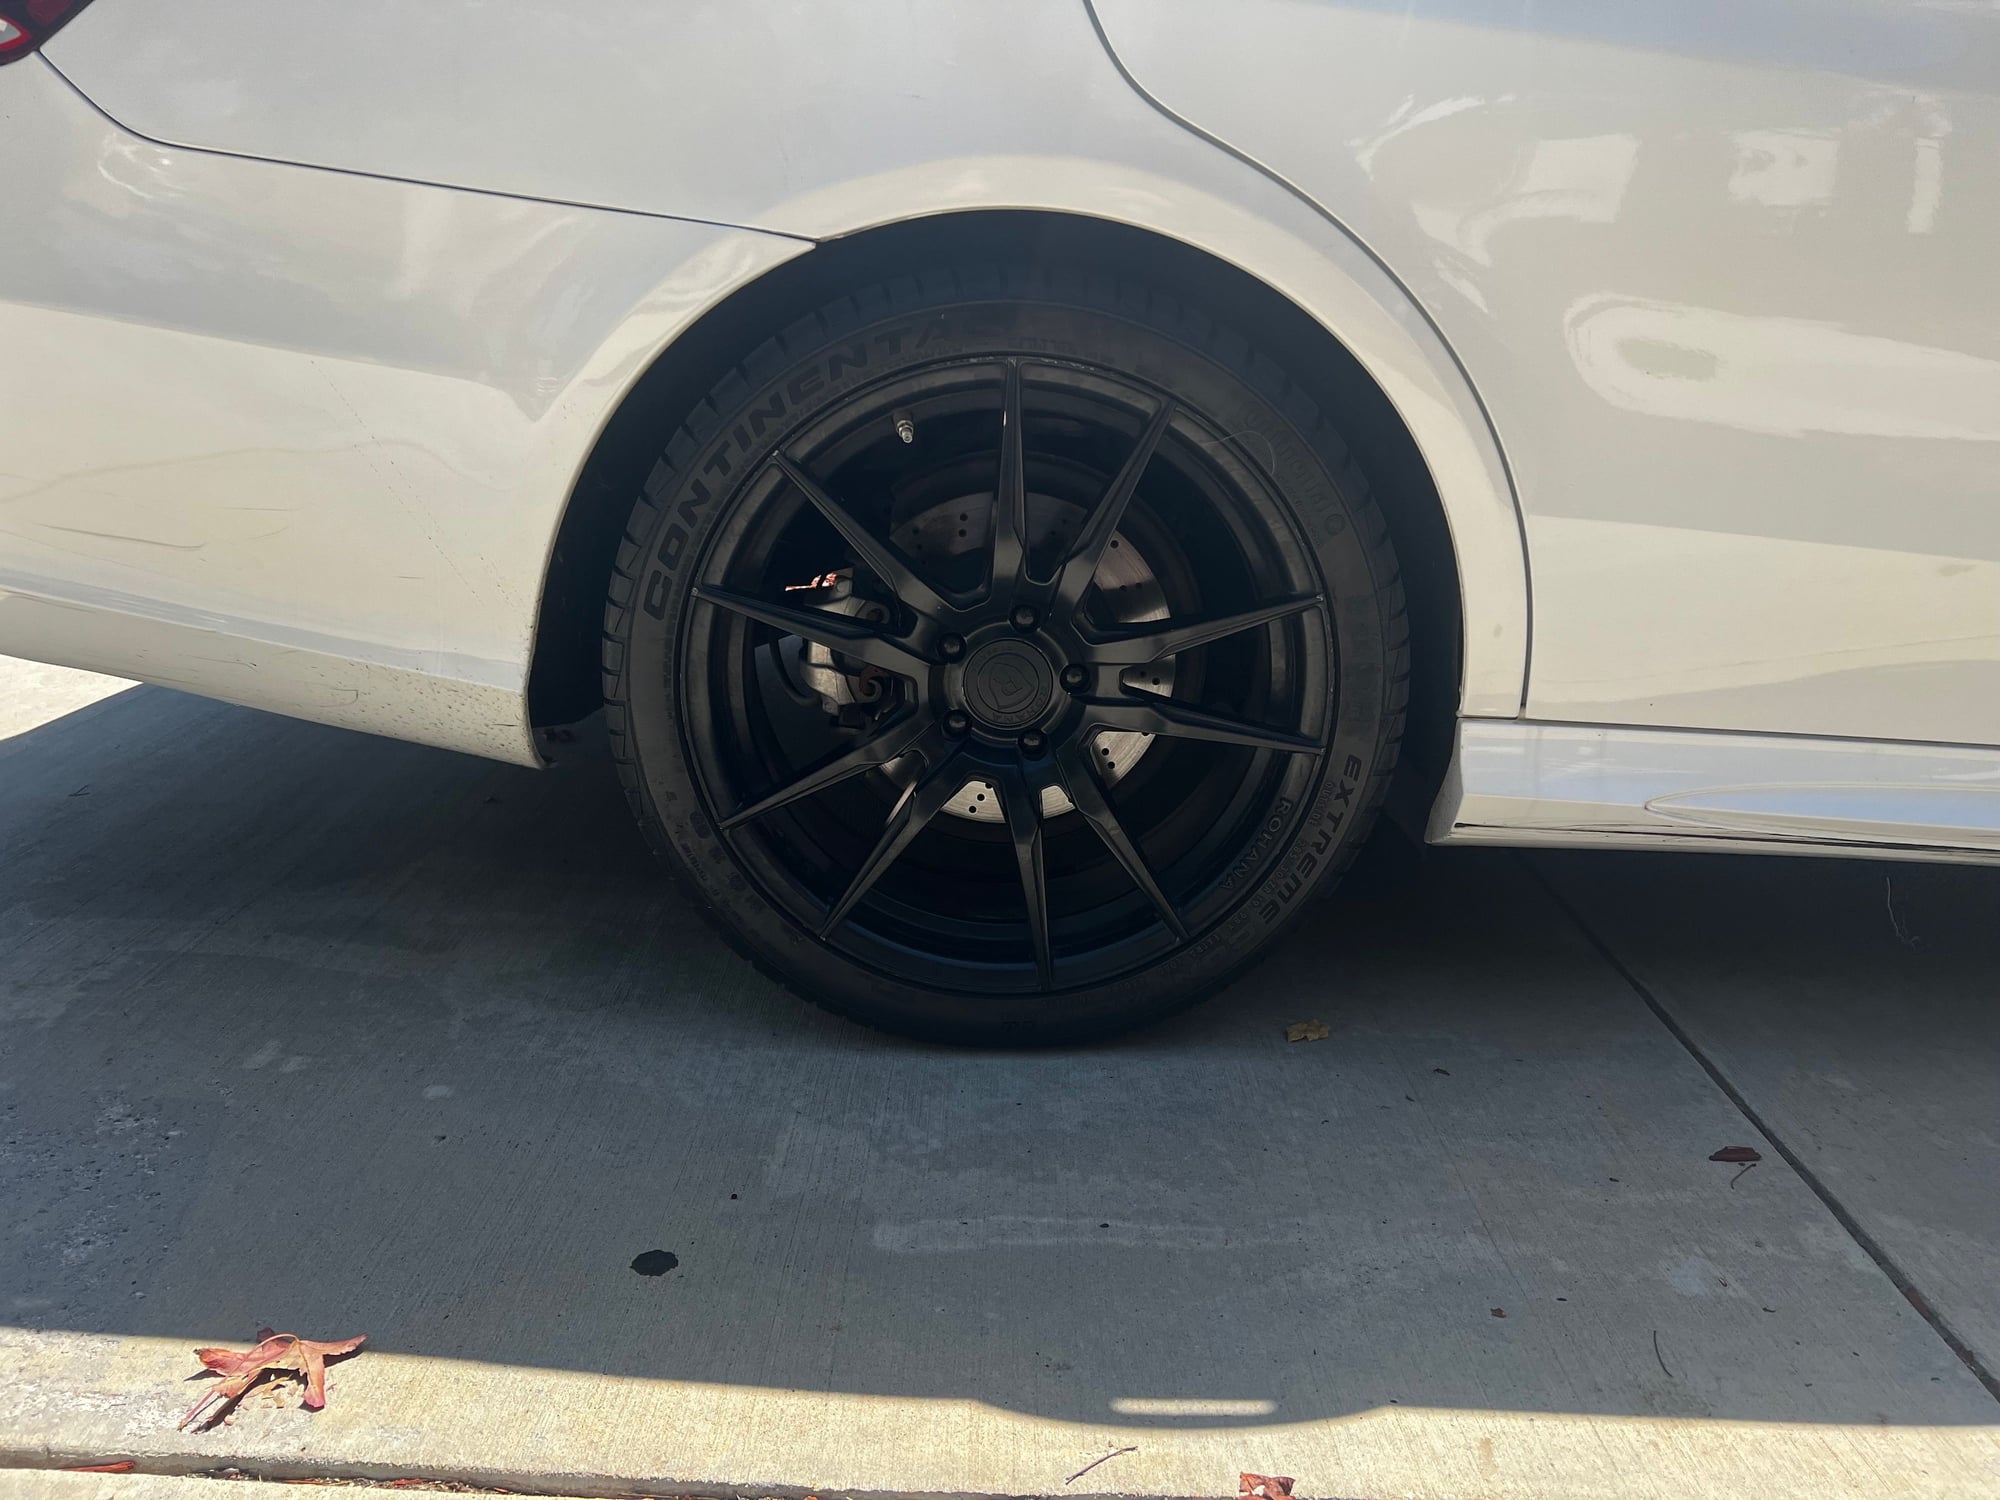 Wheels and Tires/Axles - Rohana RF2 Black Wheels & Tires/TPMS for E-Class & others - Used - 2010 to 2023 Mercedes-Benz E350 - Oxnard, CA 93035, United States